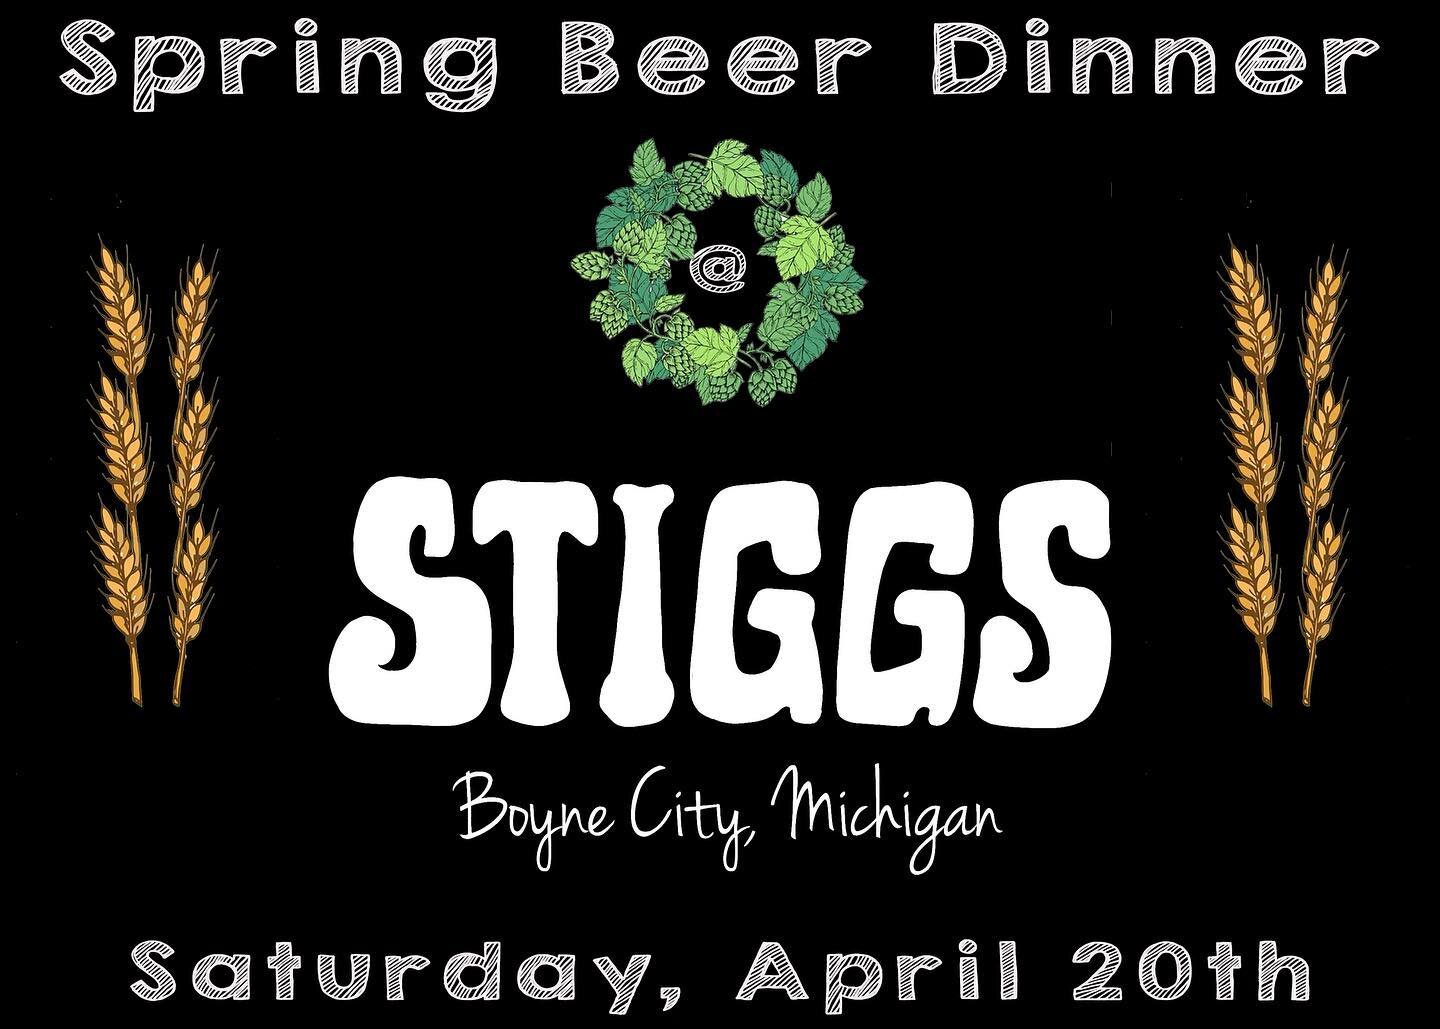 Join us on April 20th for our Spring Beer Dinner 🍺❤️ To purchase tickets or for more info, click the link for our website in the bio 👆! 

✅ 4 course pairing dinner for $65 🔥
✅ 2 seatings for the event! 4pm &amp; 7pm ‼️
✅ Support our non profit, St